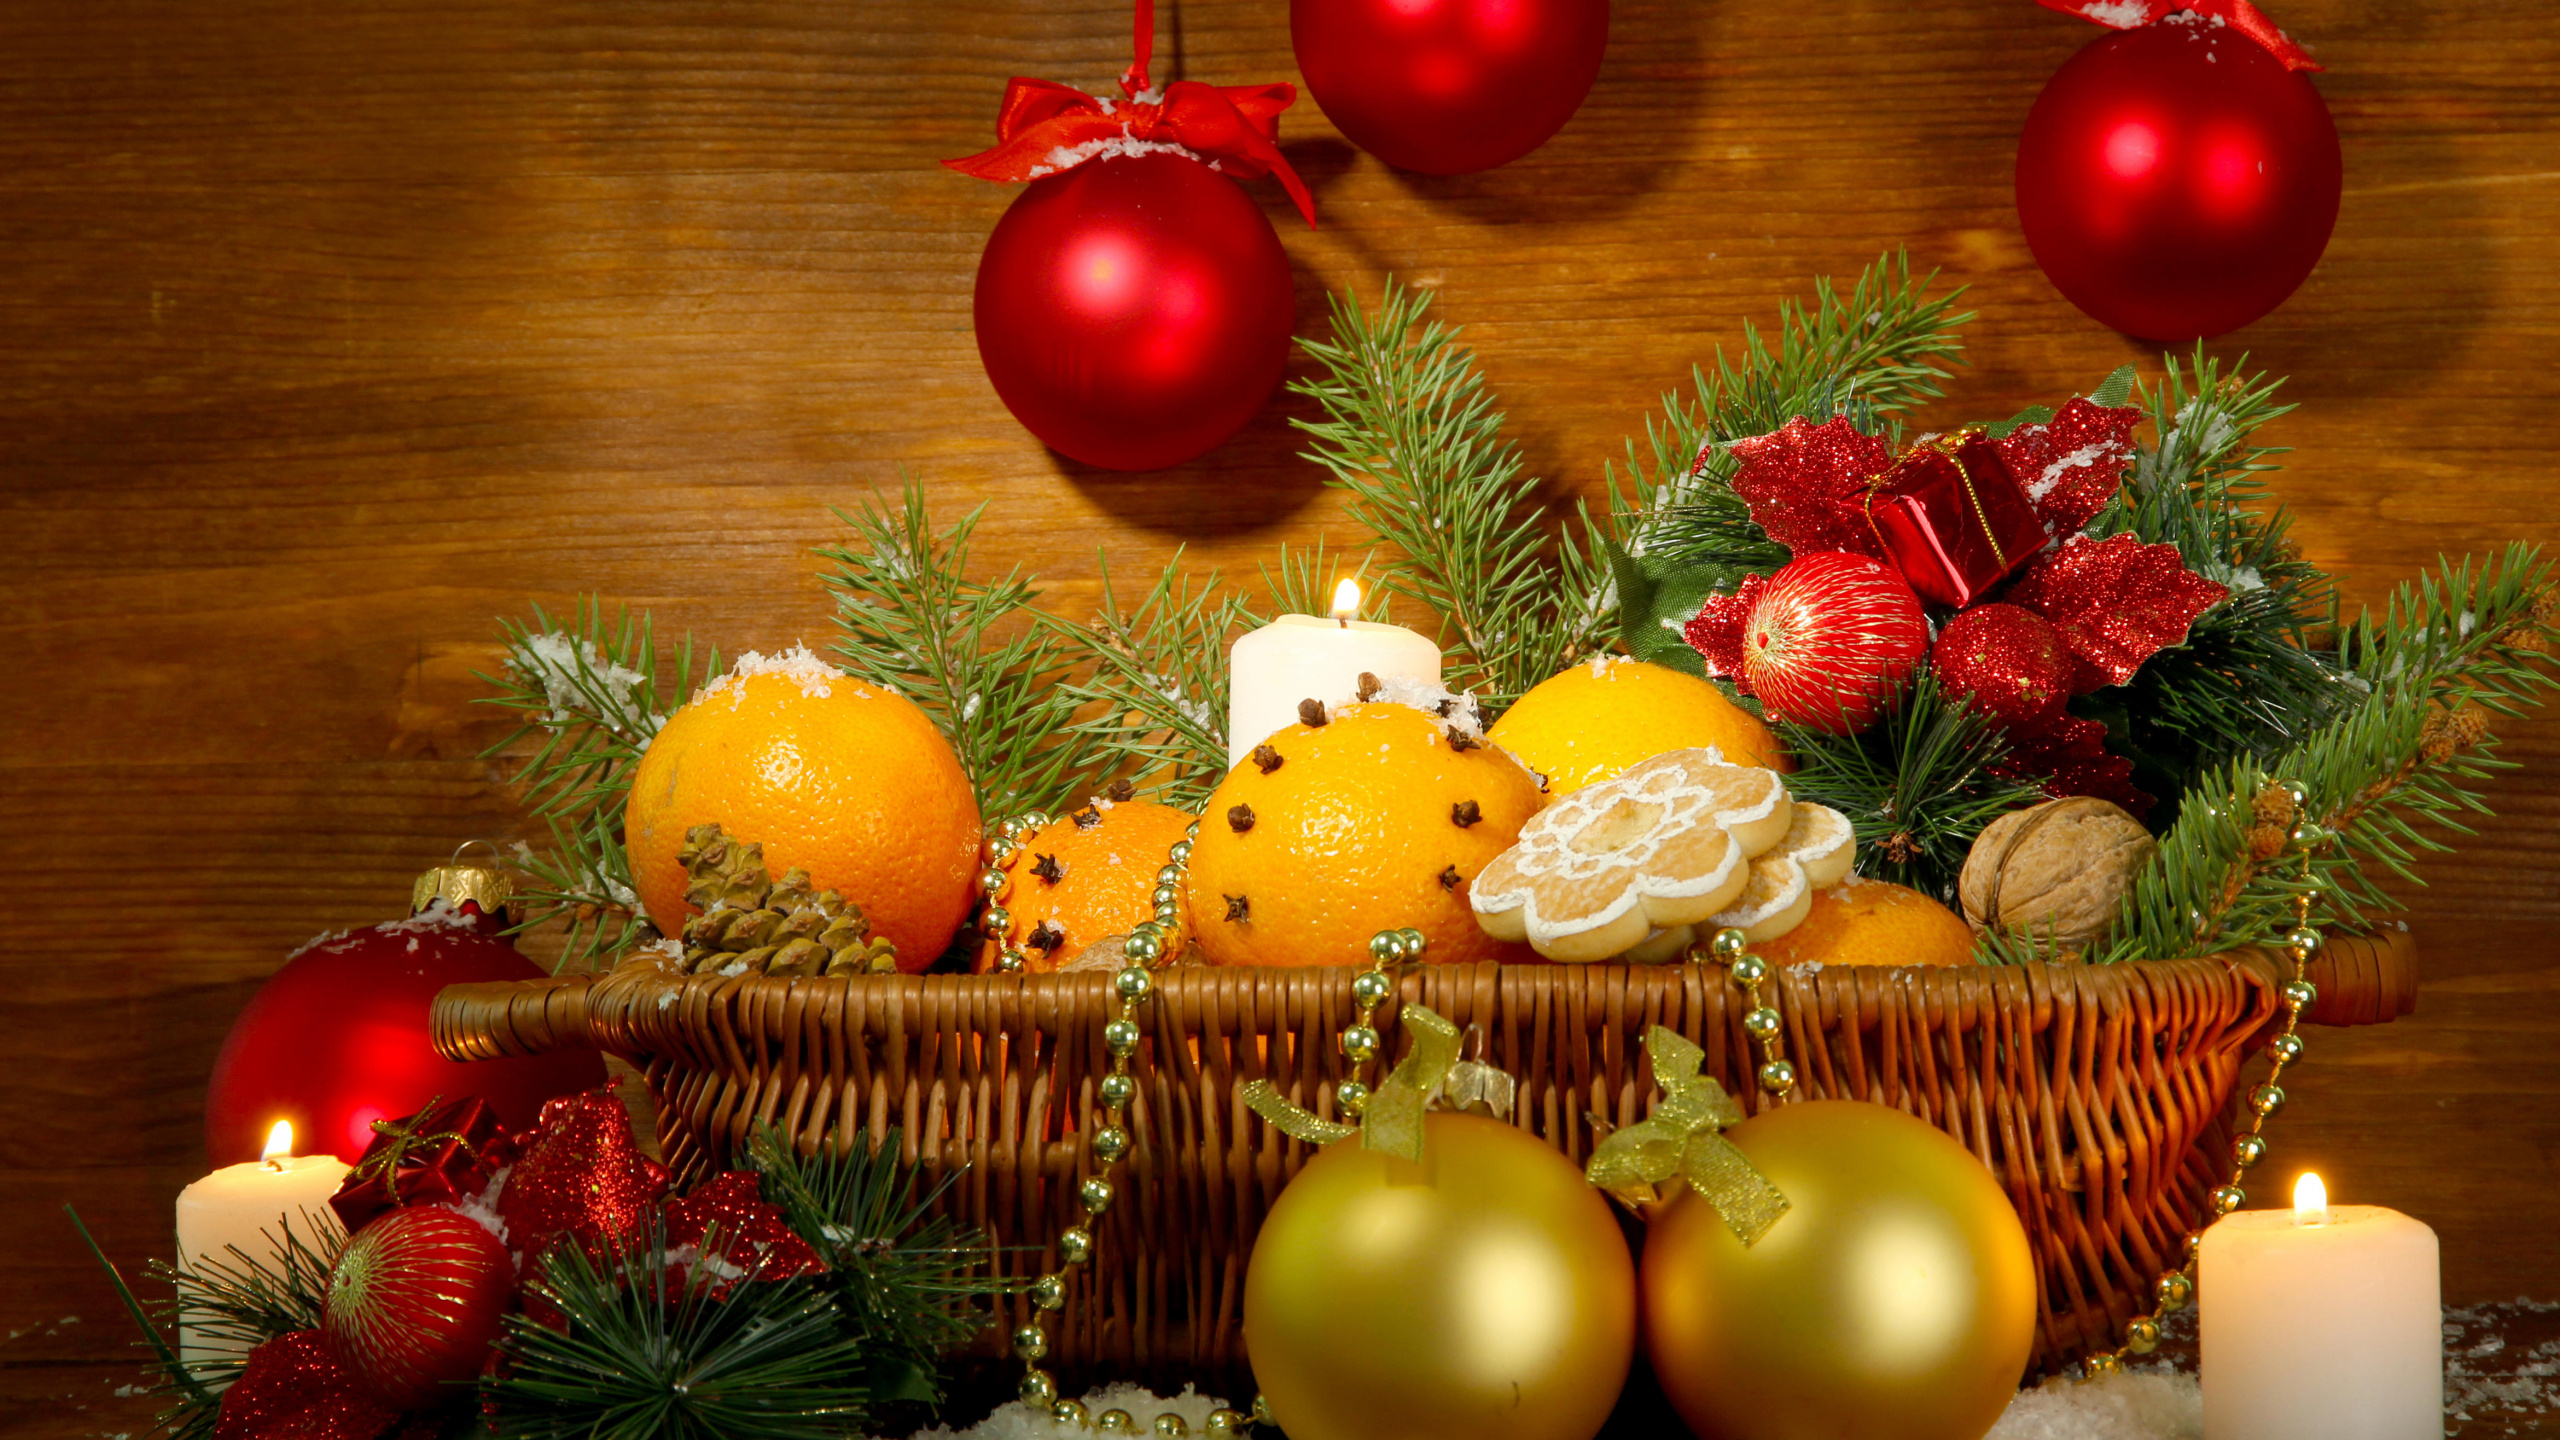 New Year, Christmas Day, Christmas Ornament, Christmas Decoration, Still Life. Wallpaper in 2560x1440 Resolution